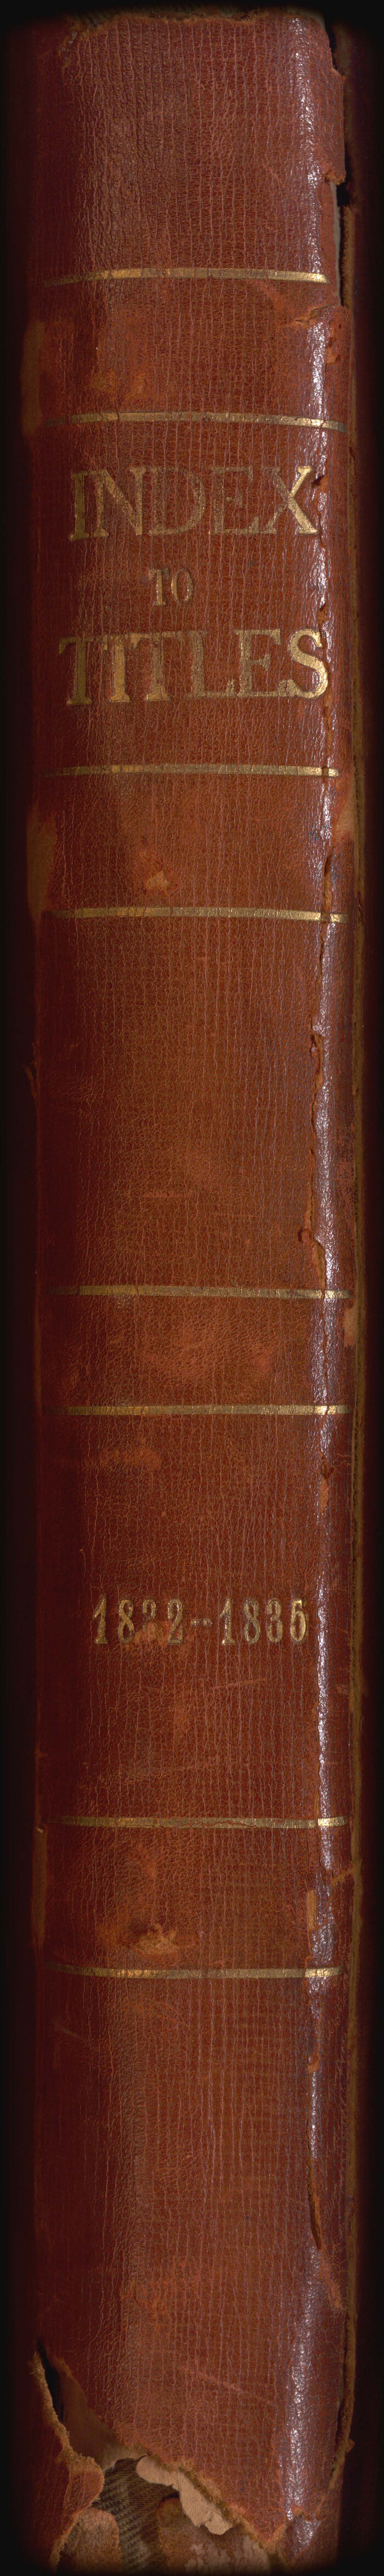 94556, Index to Titles, 1832-1835, Historical Volumes